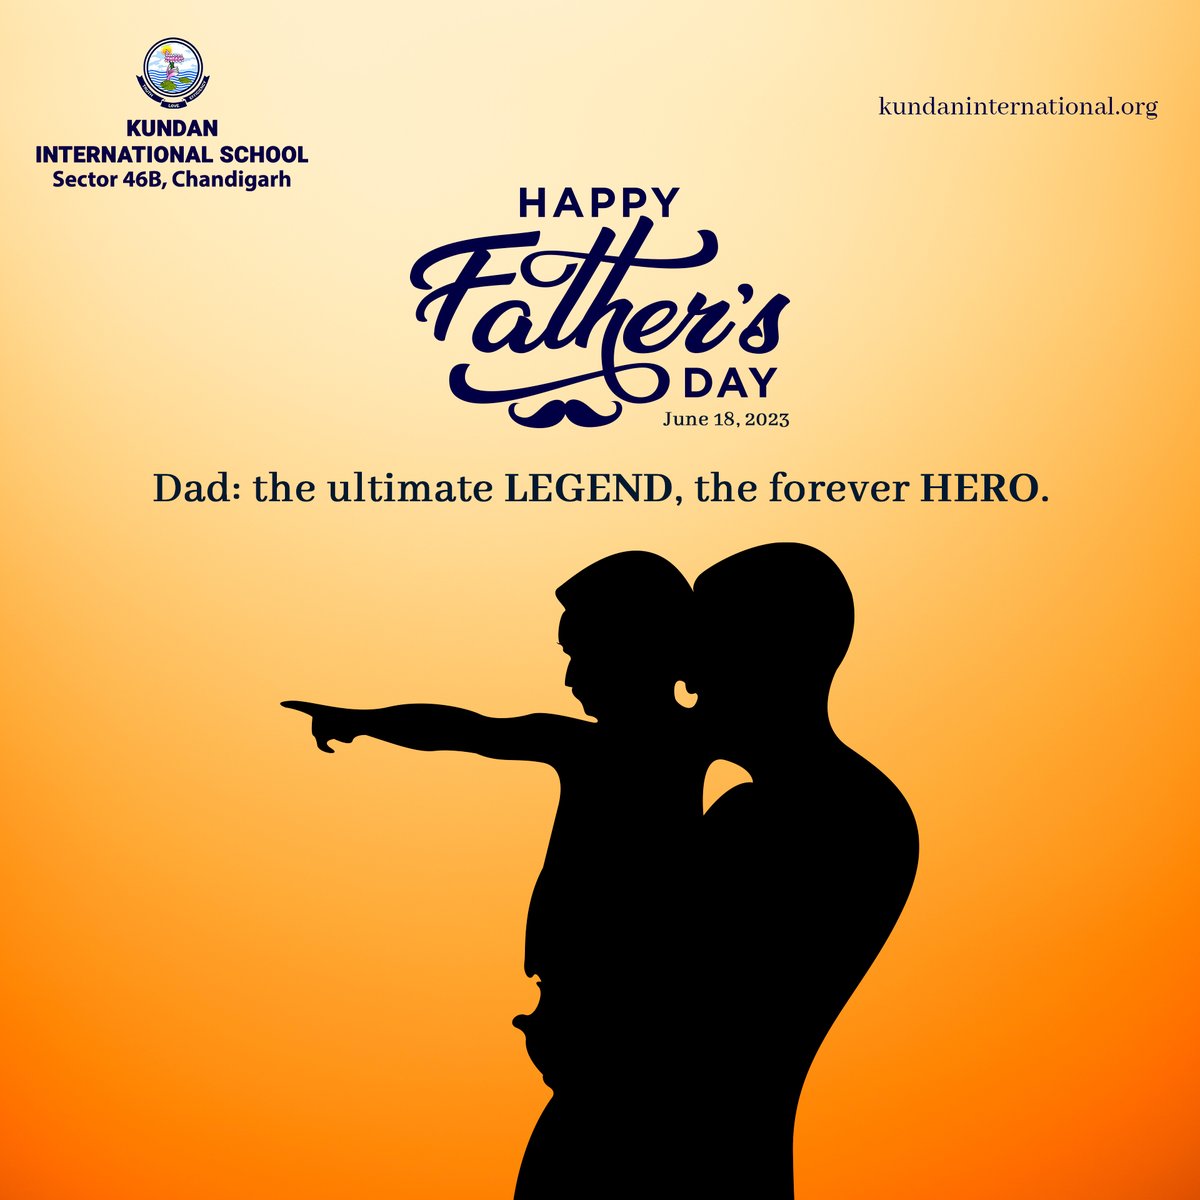 Happy Father's Day to the dads who have taught us to be kind, compassionate and empathetic towards others. You are making the world a better place 🌎👨‍👧‍👦 

#FathersDay #BestDadEver #KundanInternationalSchool #SchoolInChandigarh #Education #SchoolSpirit #BlendedLearning #Curriculum